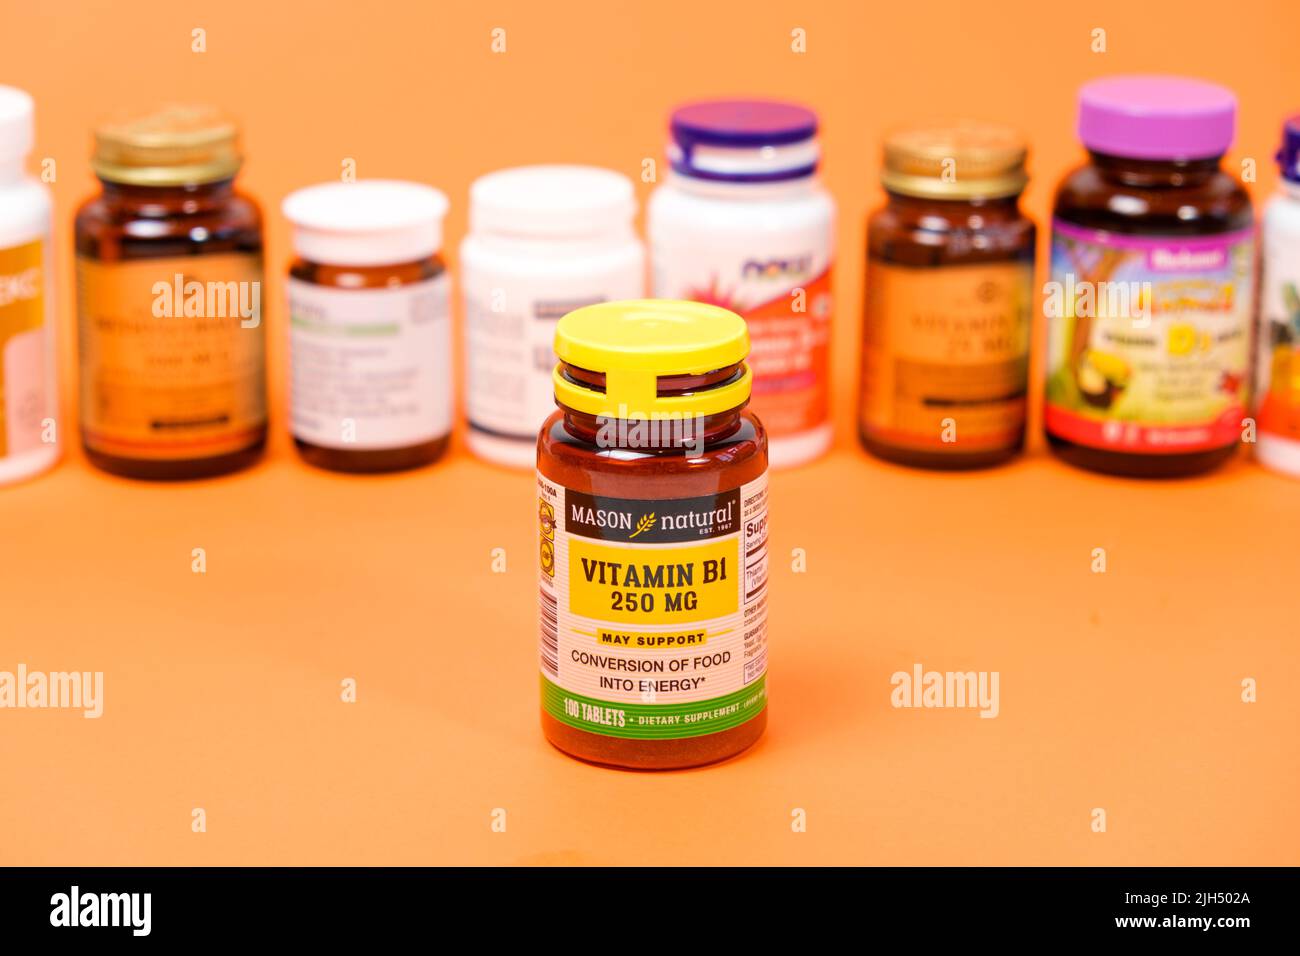 Vitamin B1 and other dietary supplements on an orange background. 19 May 2022, Ukraine, Zaporozhye Stock Photo